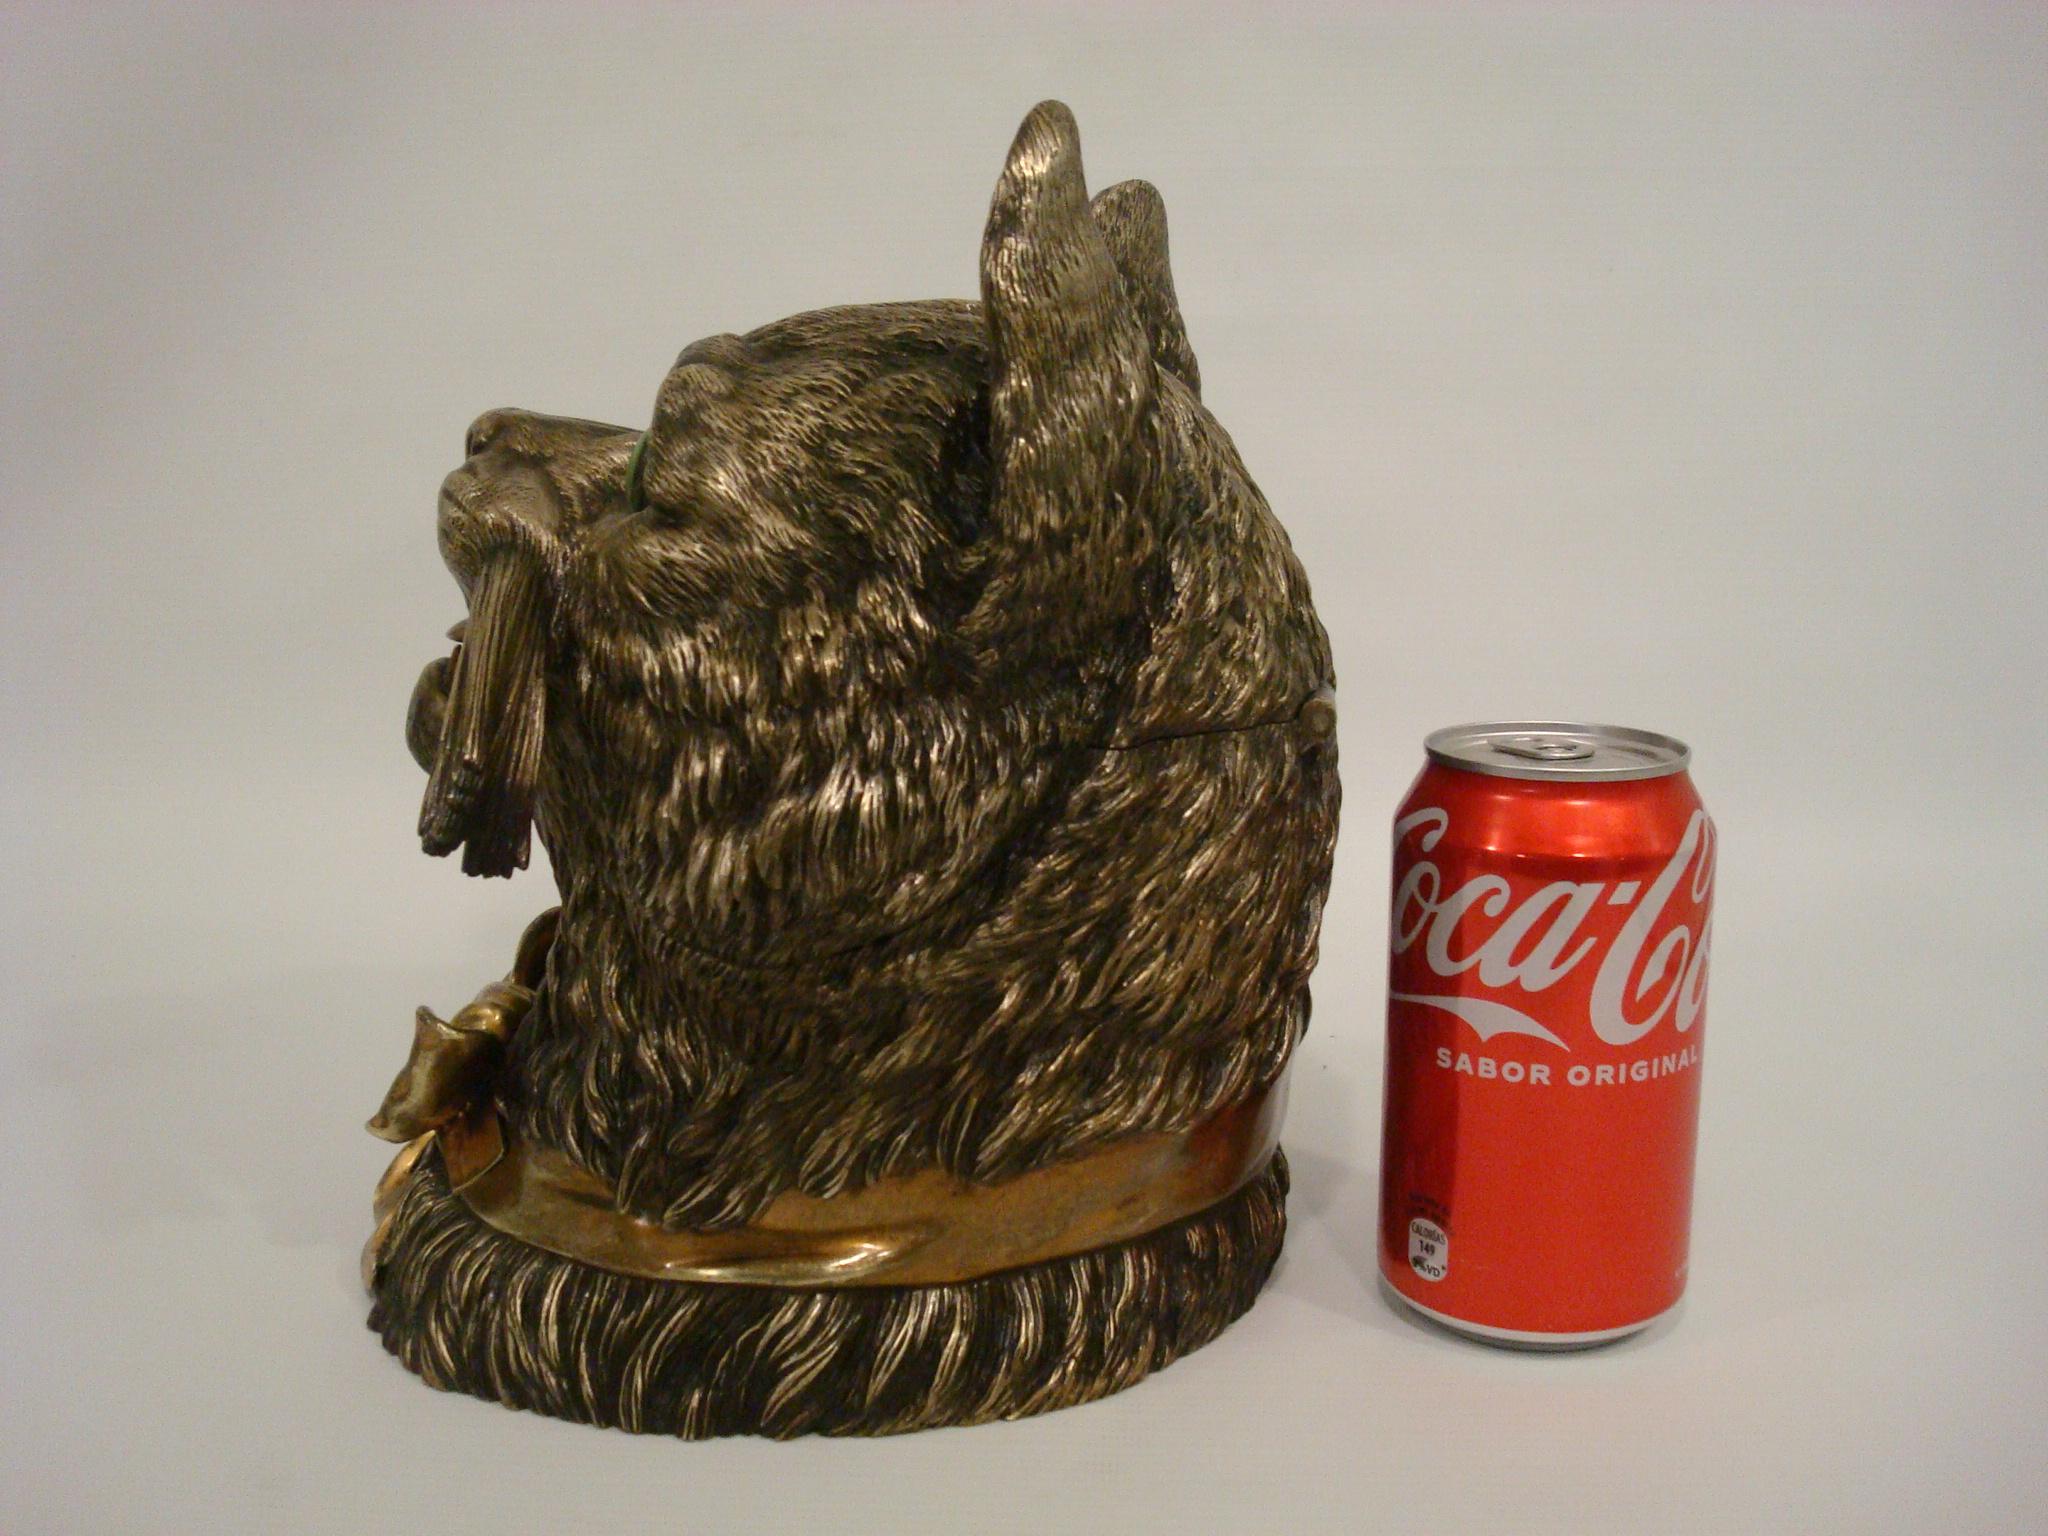 Novelty Bronze Cigars / Cigarettes Humidor Formed as a Cat's Head Sculpture For Sale 8